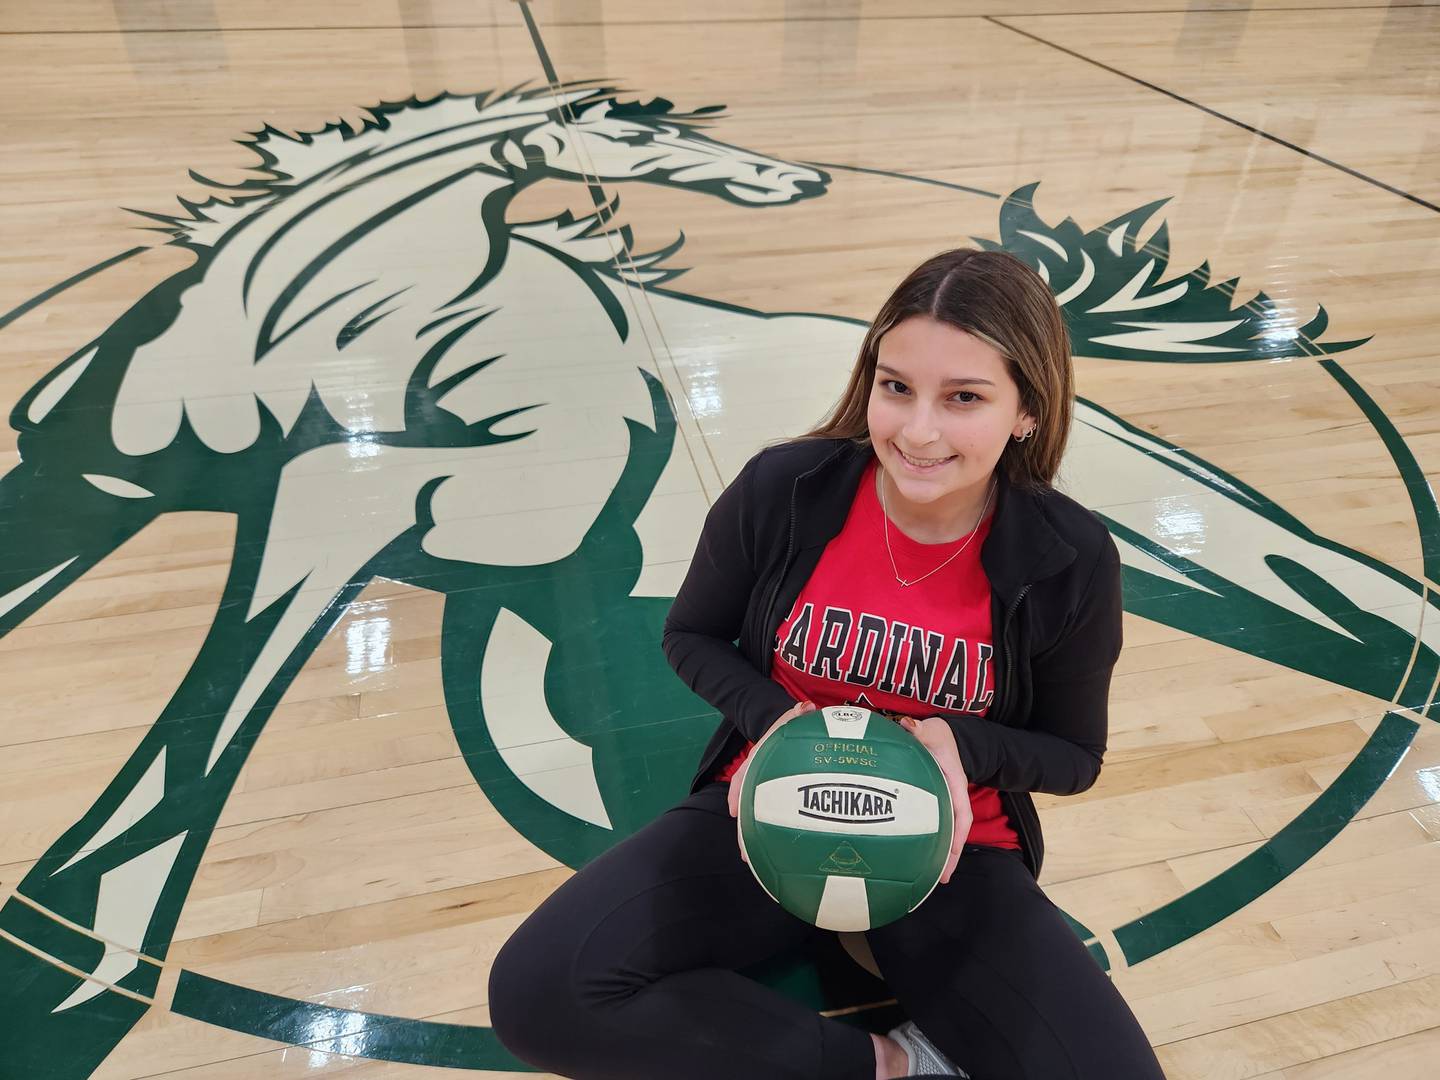 Evergreen Park girls volleyball player Emma Bik talked about her unusual road to a college rowing scholarship during a conversation on Monday, Nov. 21, 2022.